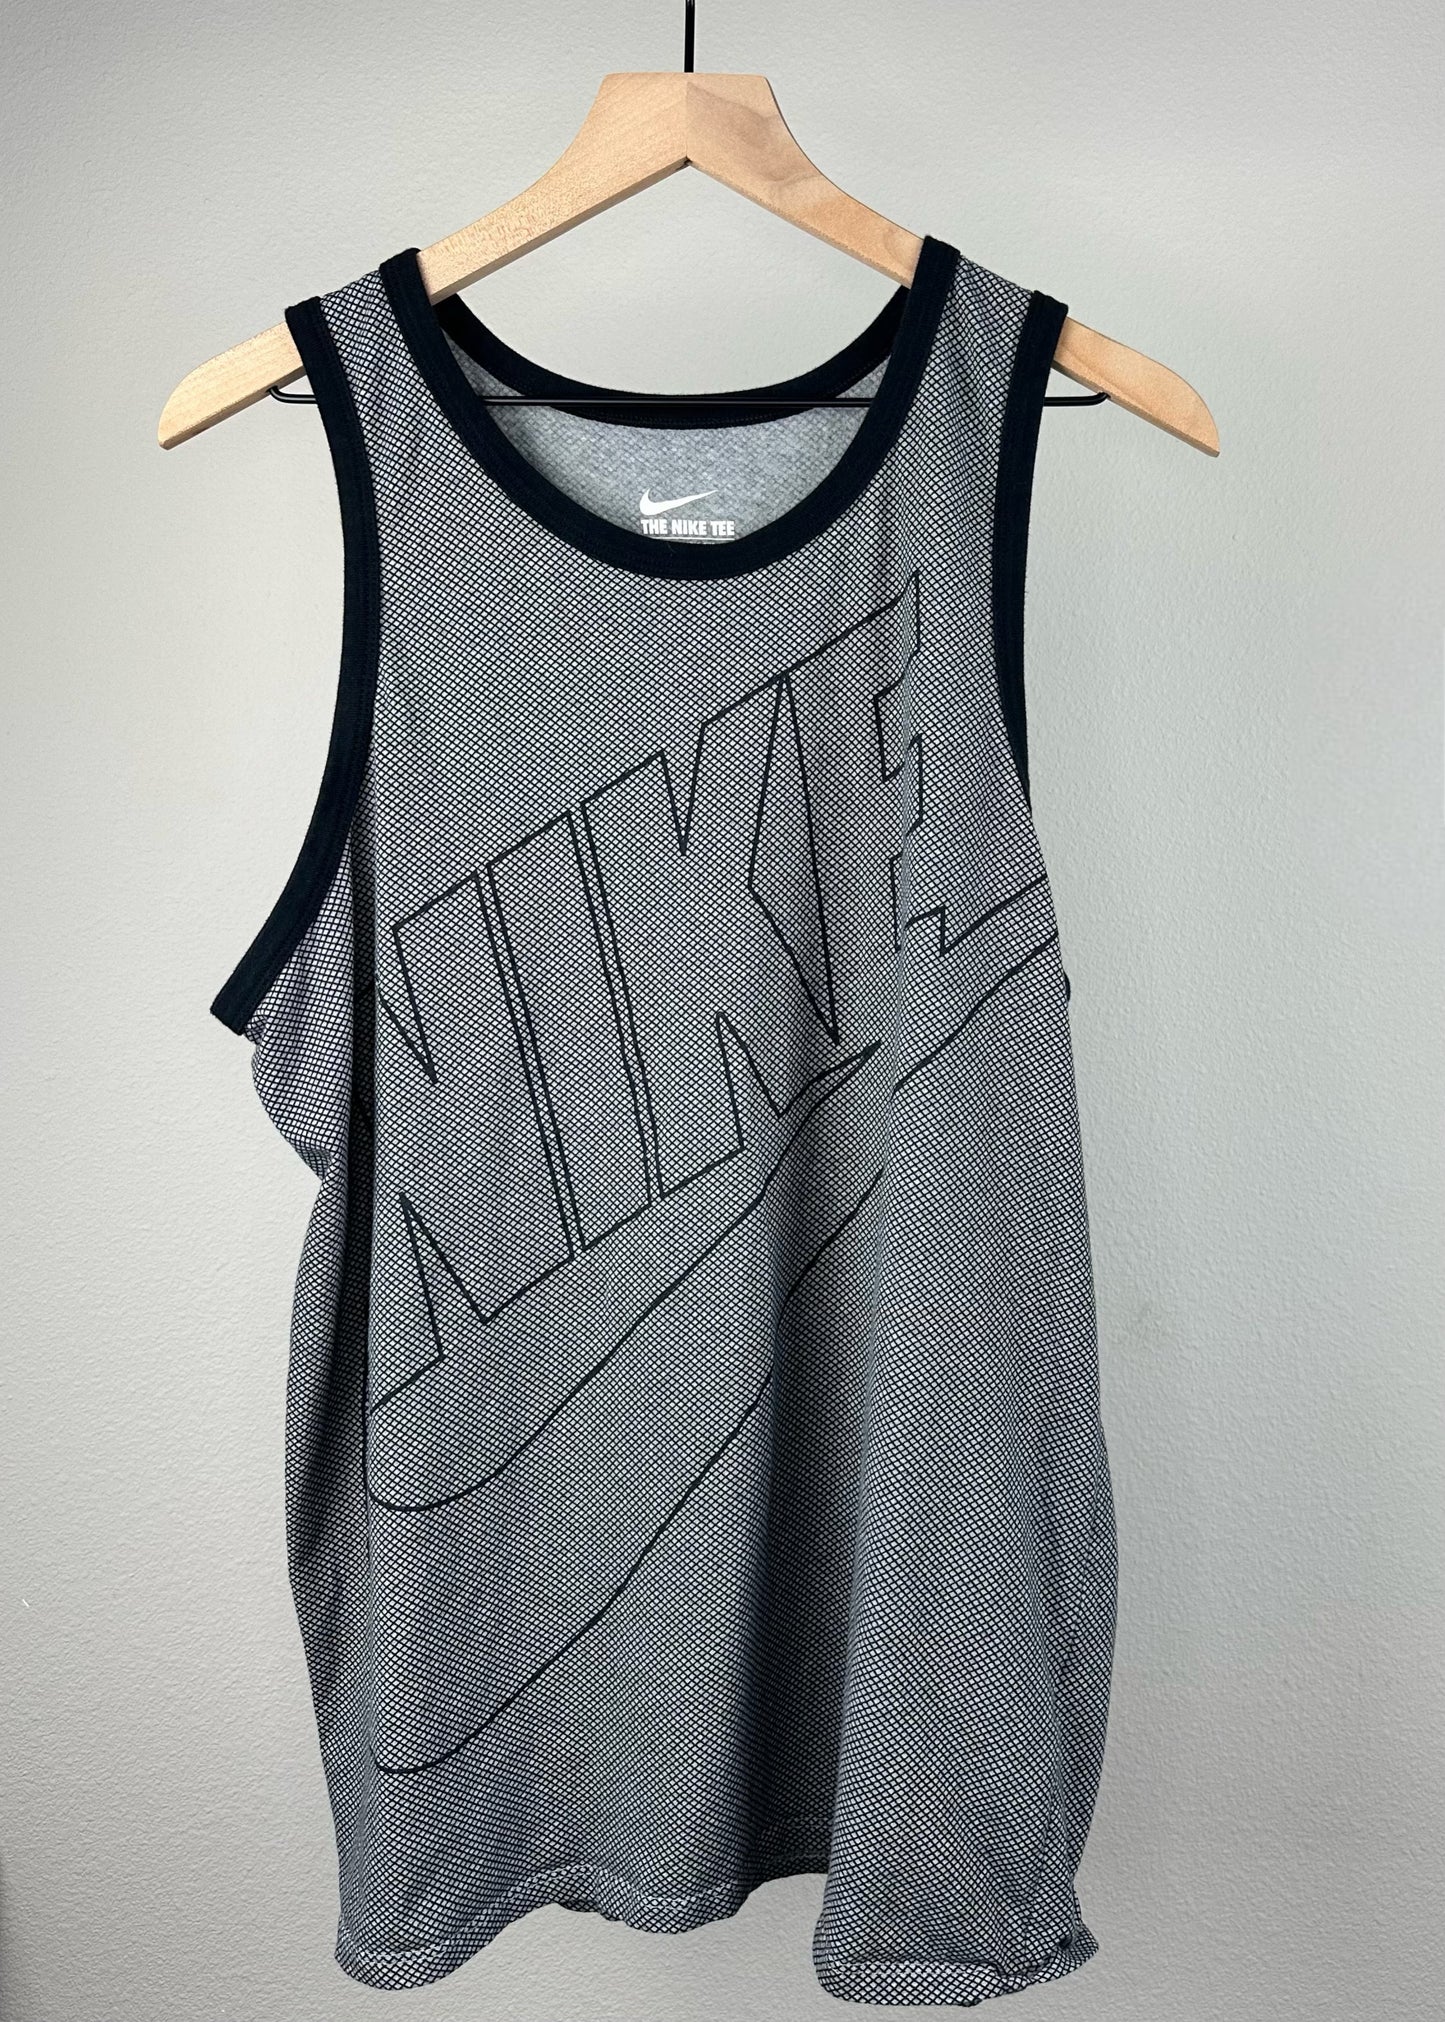 Grey and Black Tank Top By Nike